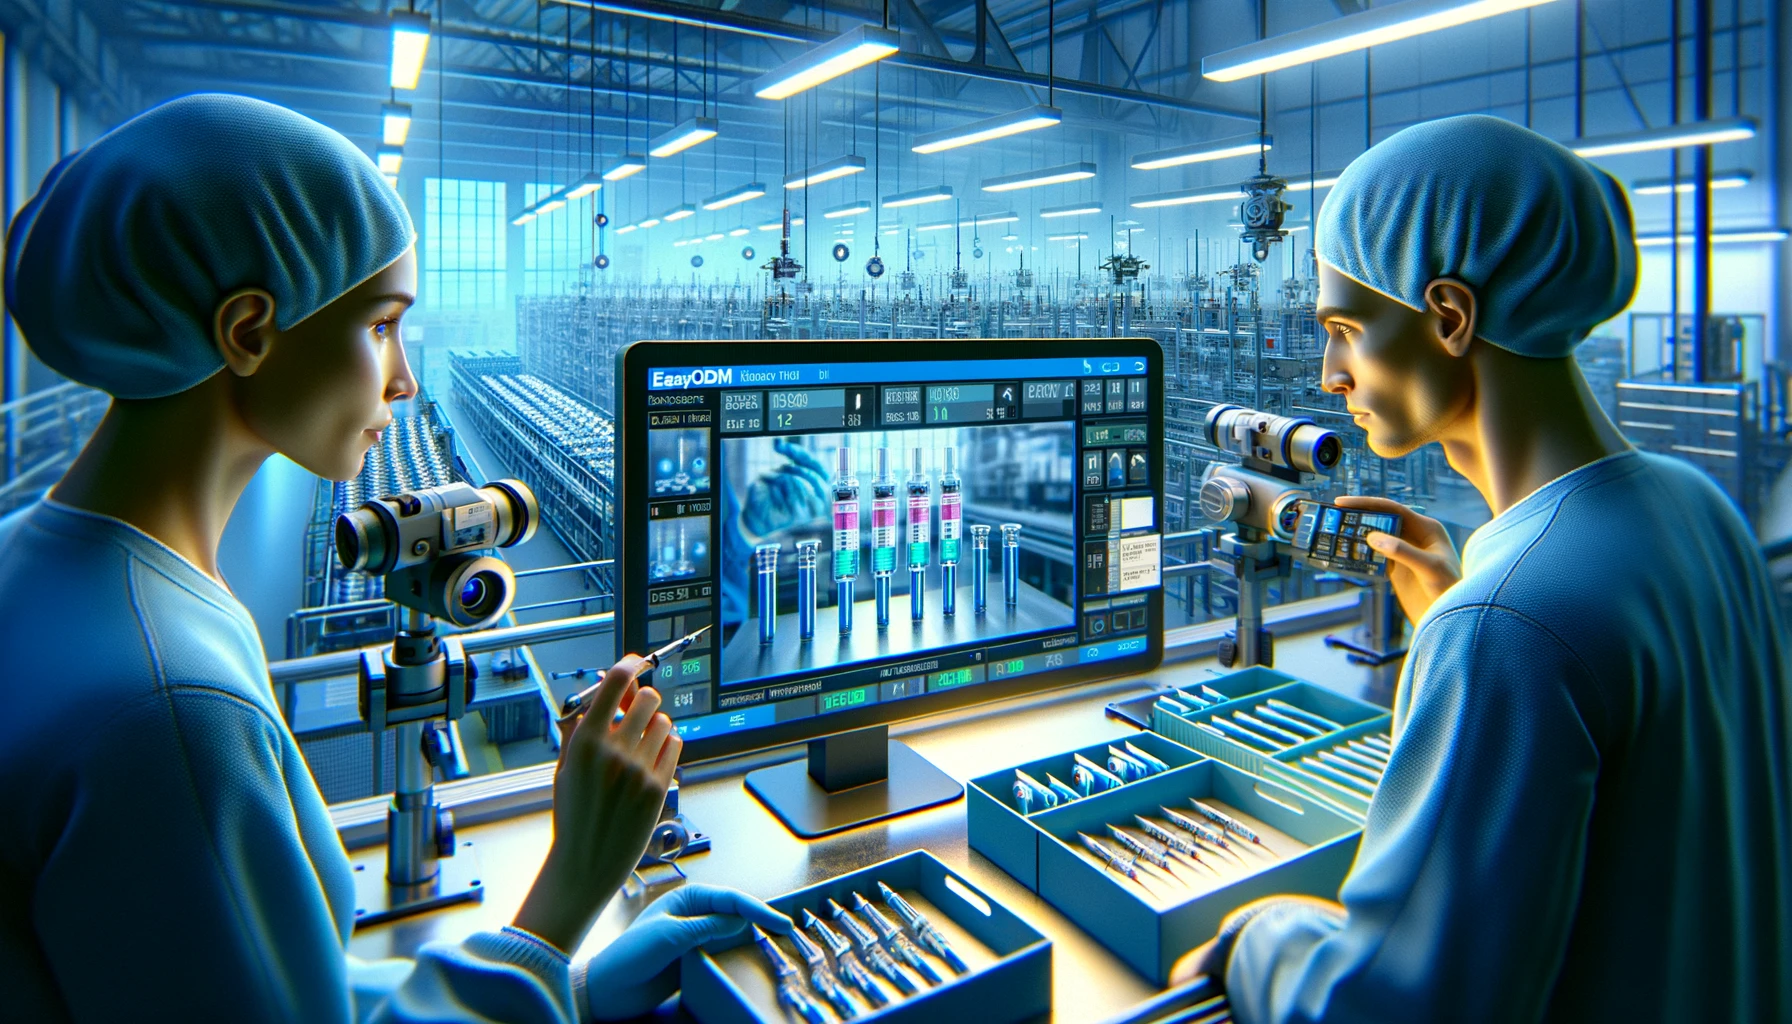 Here's the illustration for the article about a medical device manufacturer improving quality control through EasyODM's machine vision software. The scene captures two quality control technicians in a high-tech manufacturing facility, closely monitoring industrial cameras and digital displays that inspect medical devices for label accuracy and tube color. The environment is rendered in cool light colors, emphasizing the precision and cleanliness essential to the setting.